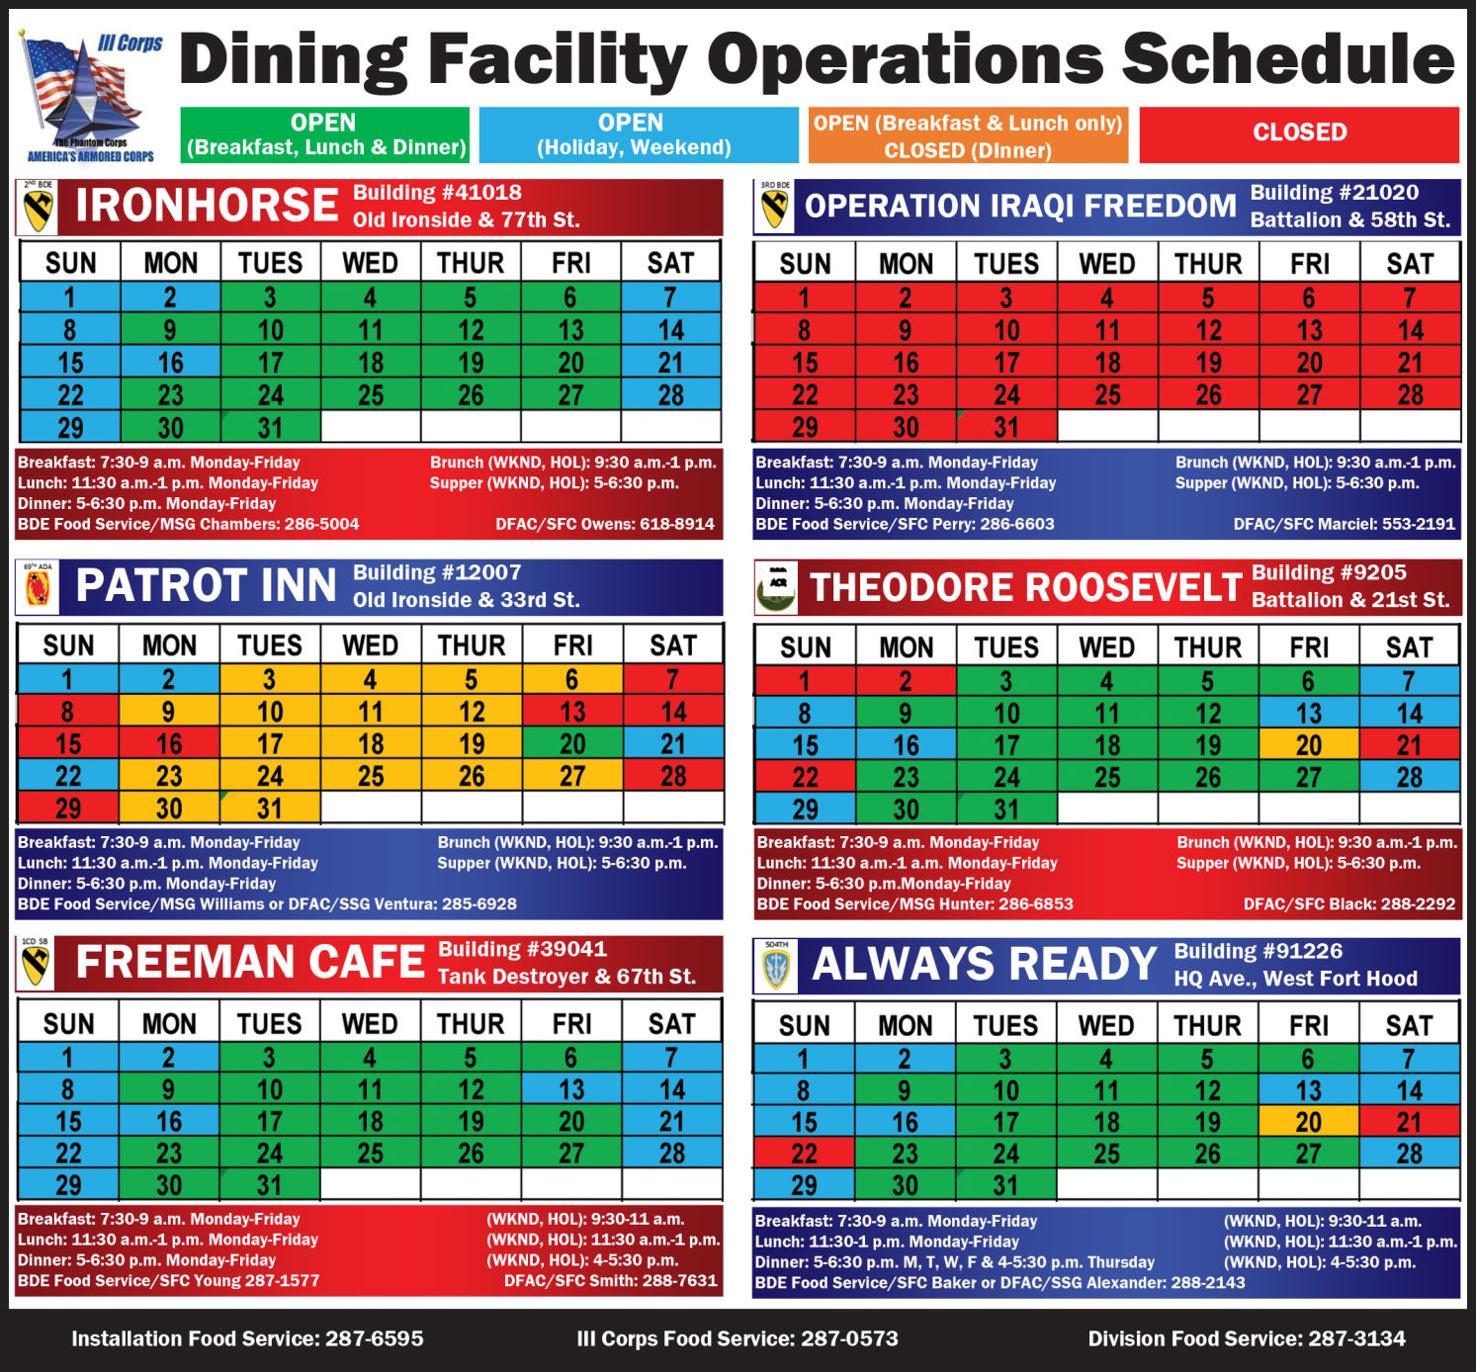 Dining Facility Operations Schedule | Dining Facility